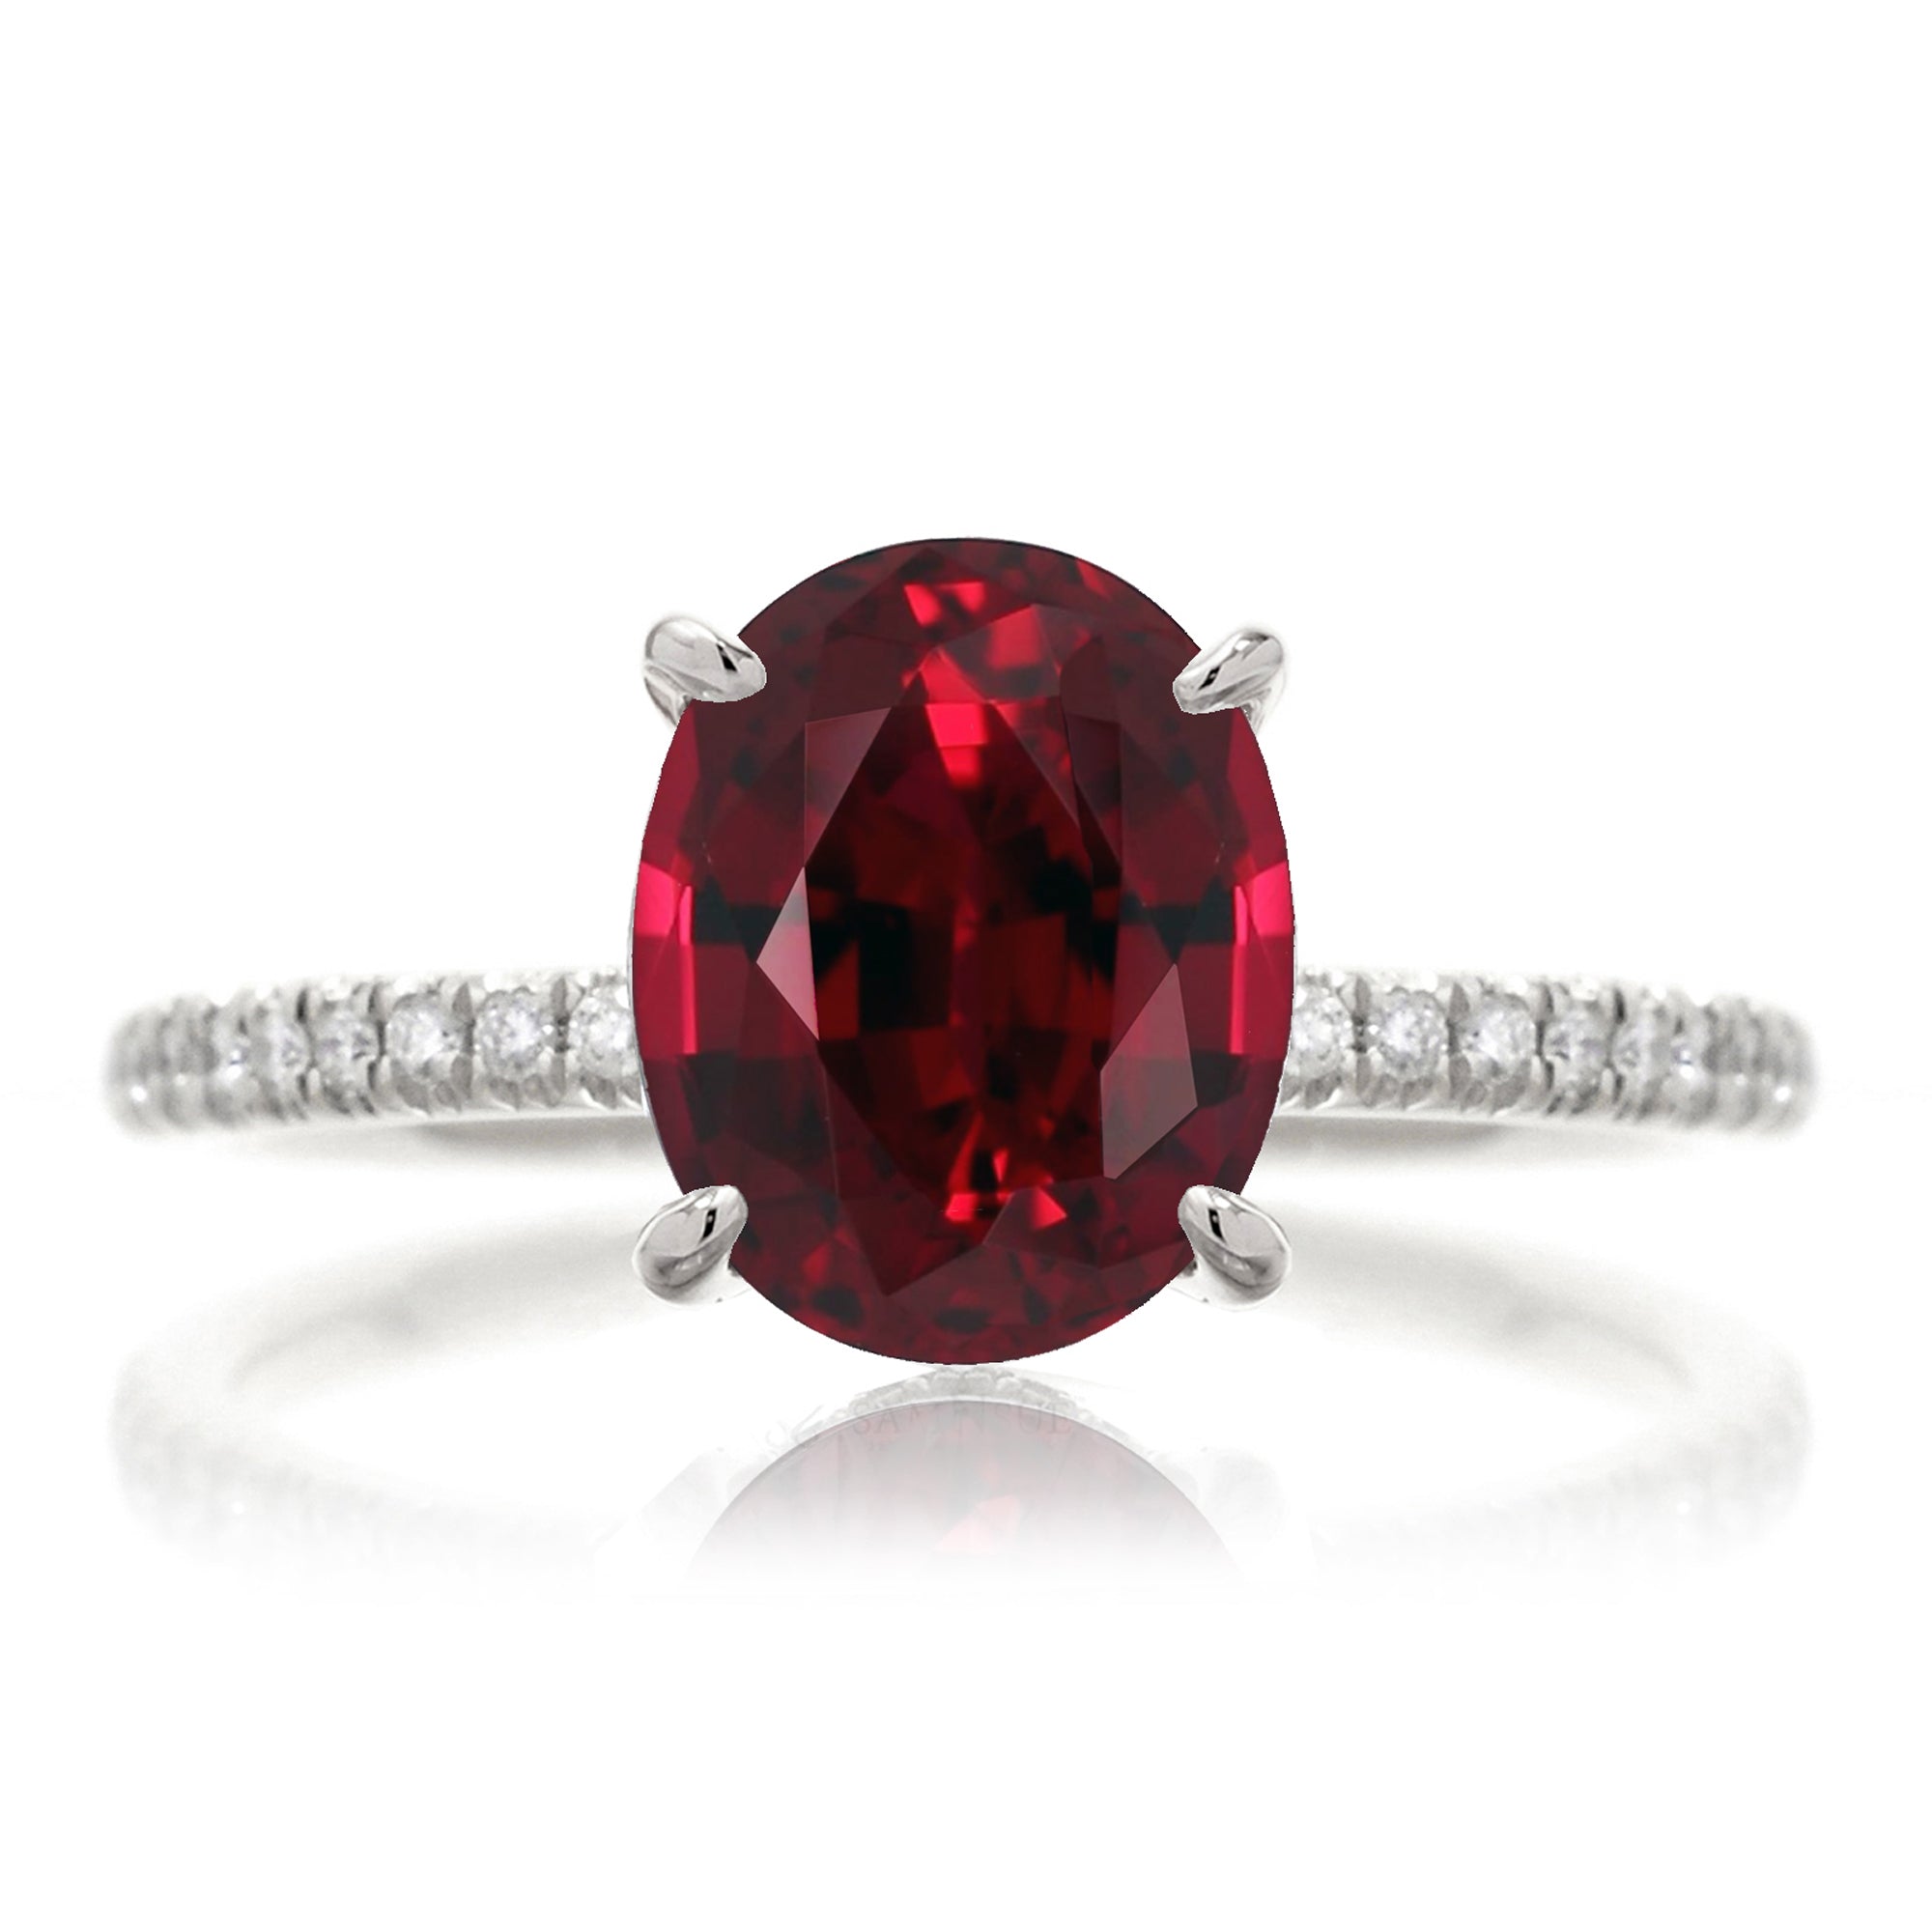 The Ava Oval Lab-Grown Ruby